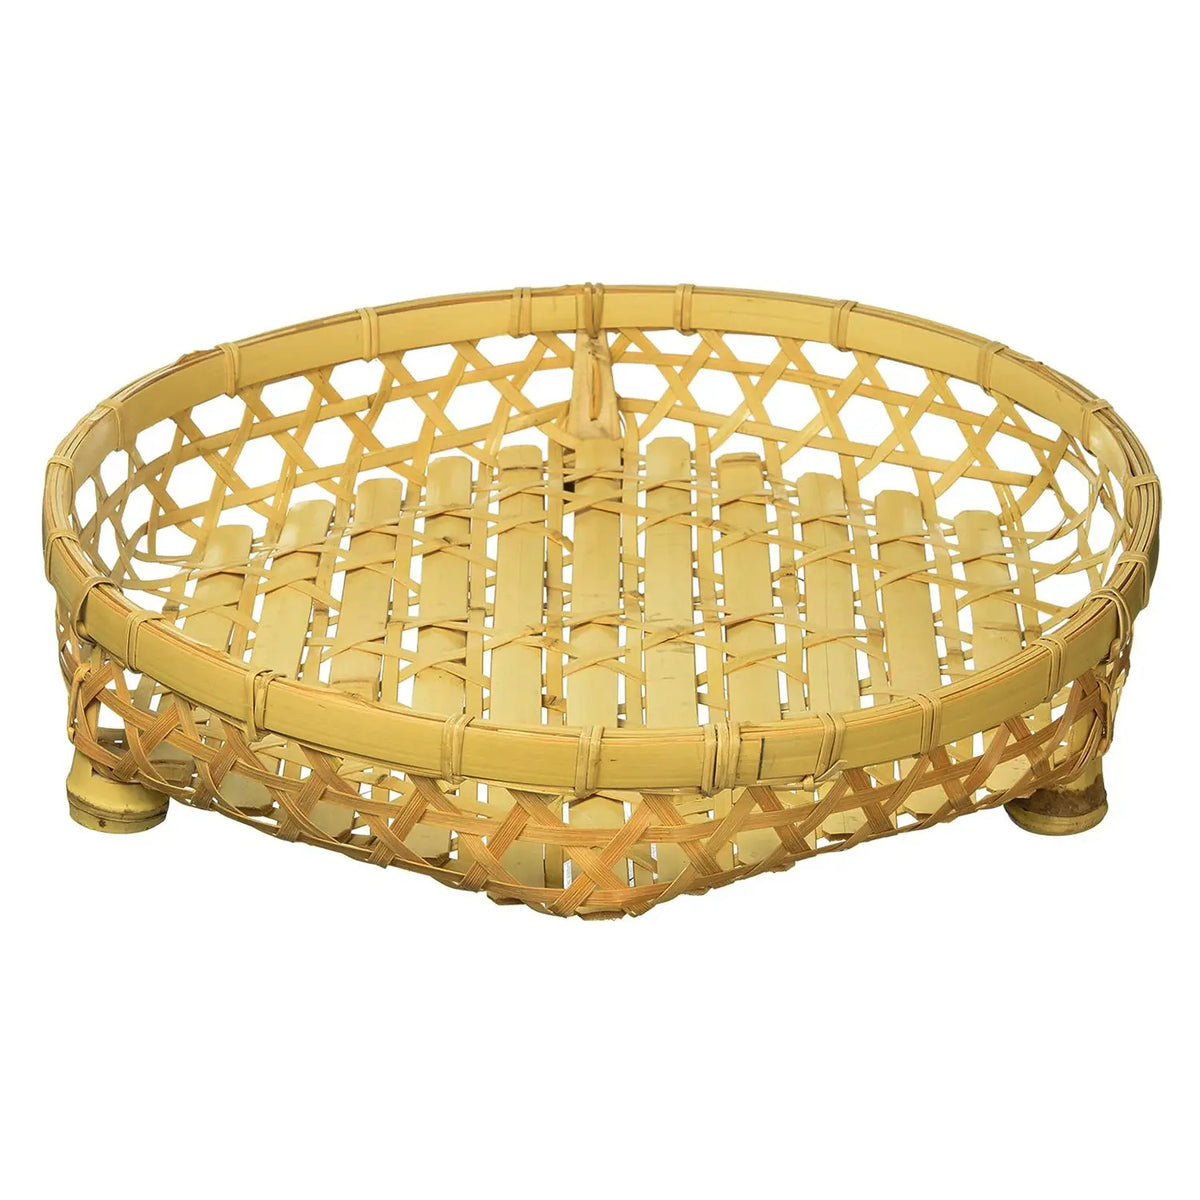 MANYO Bamboo Serving Basket with Feet